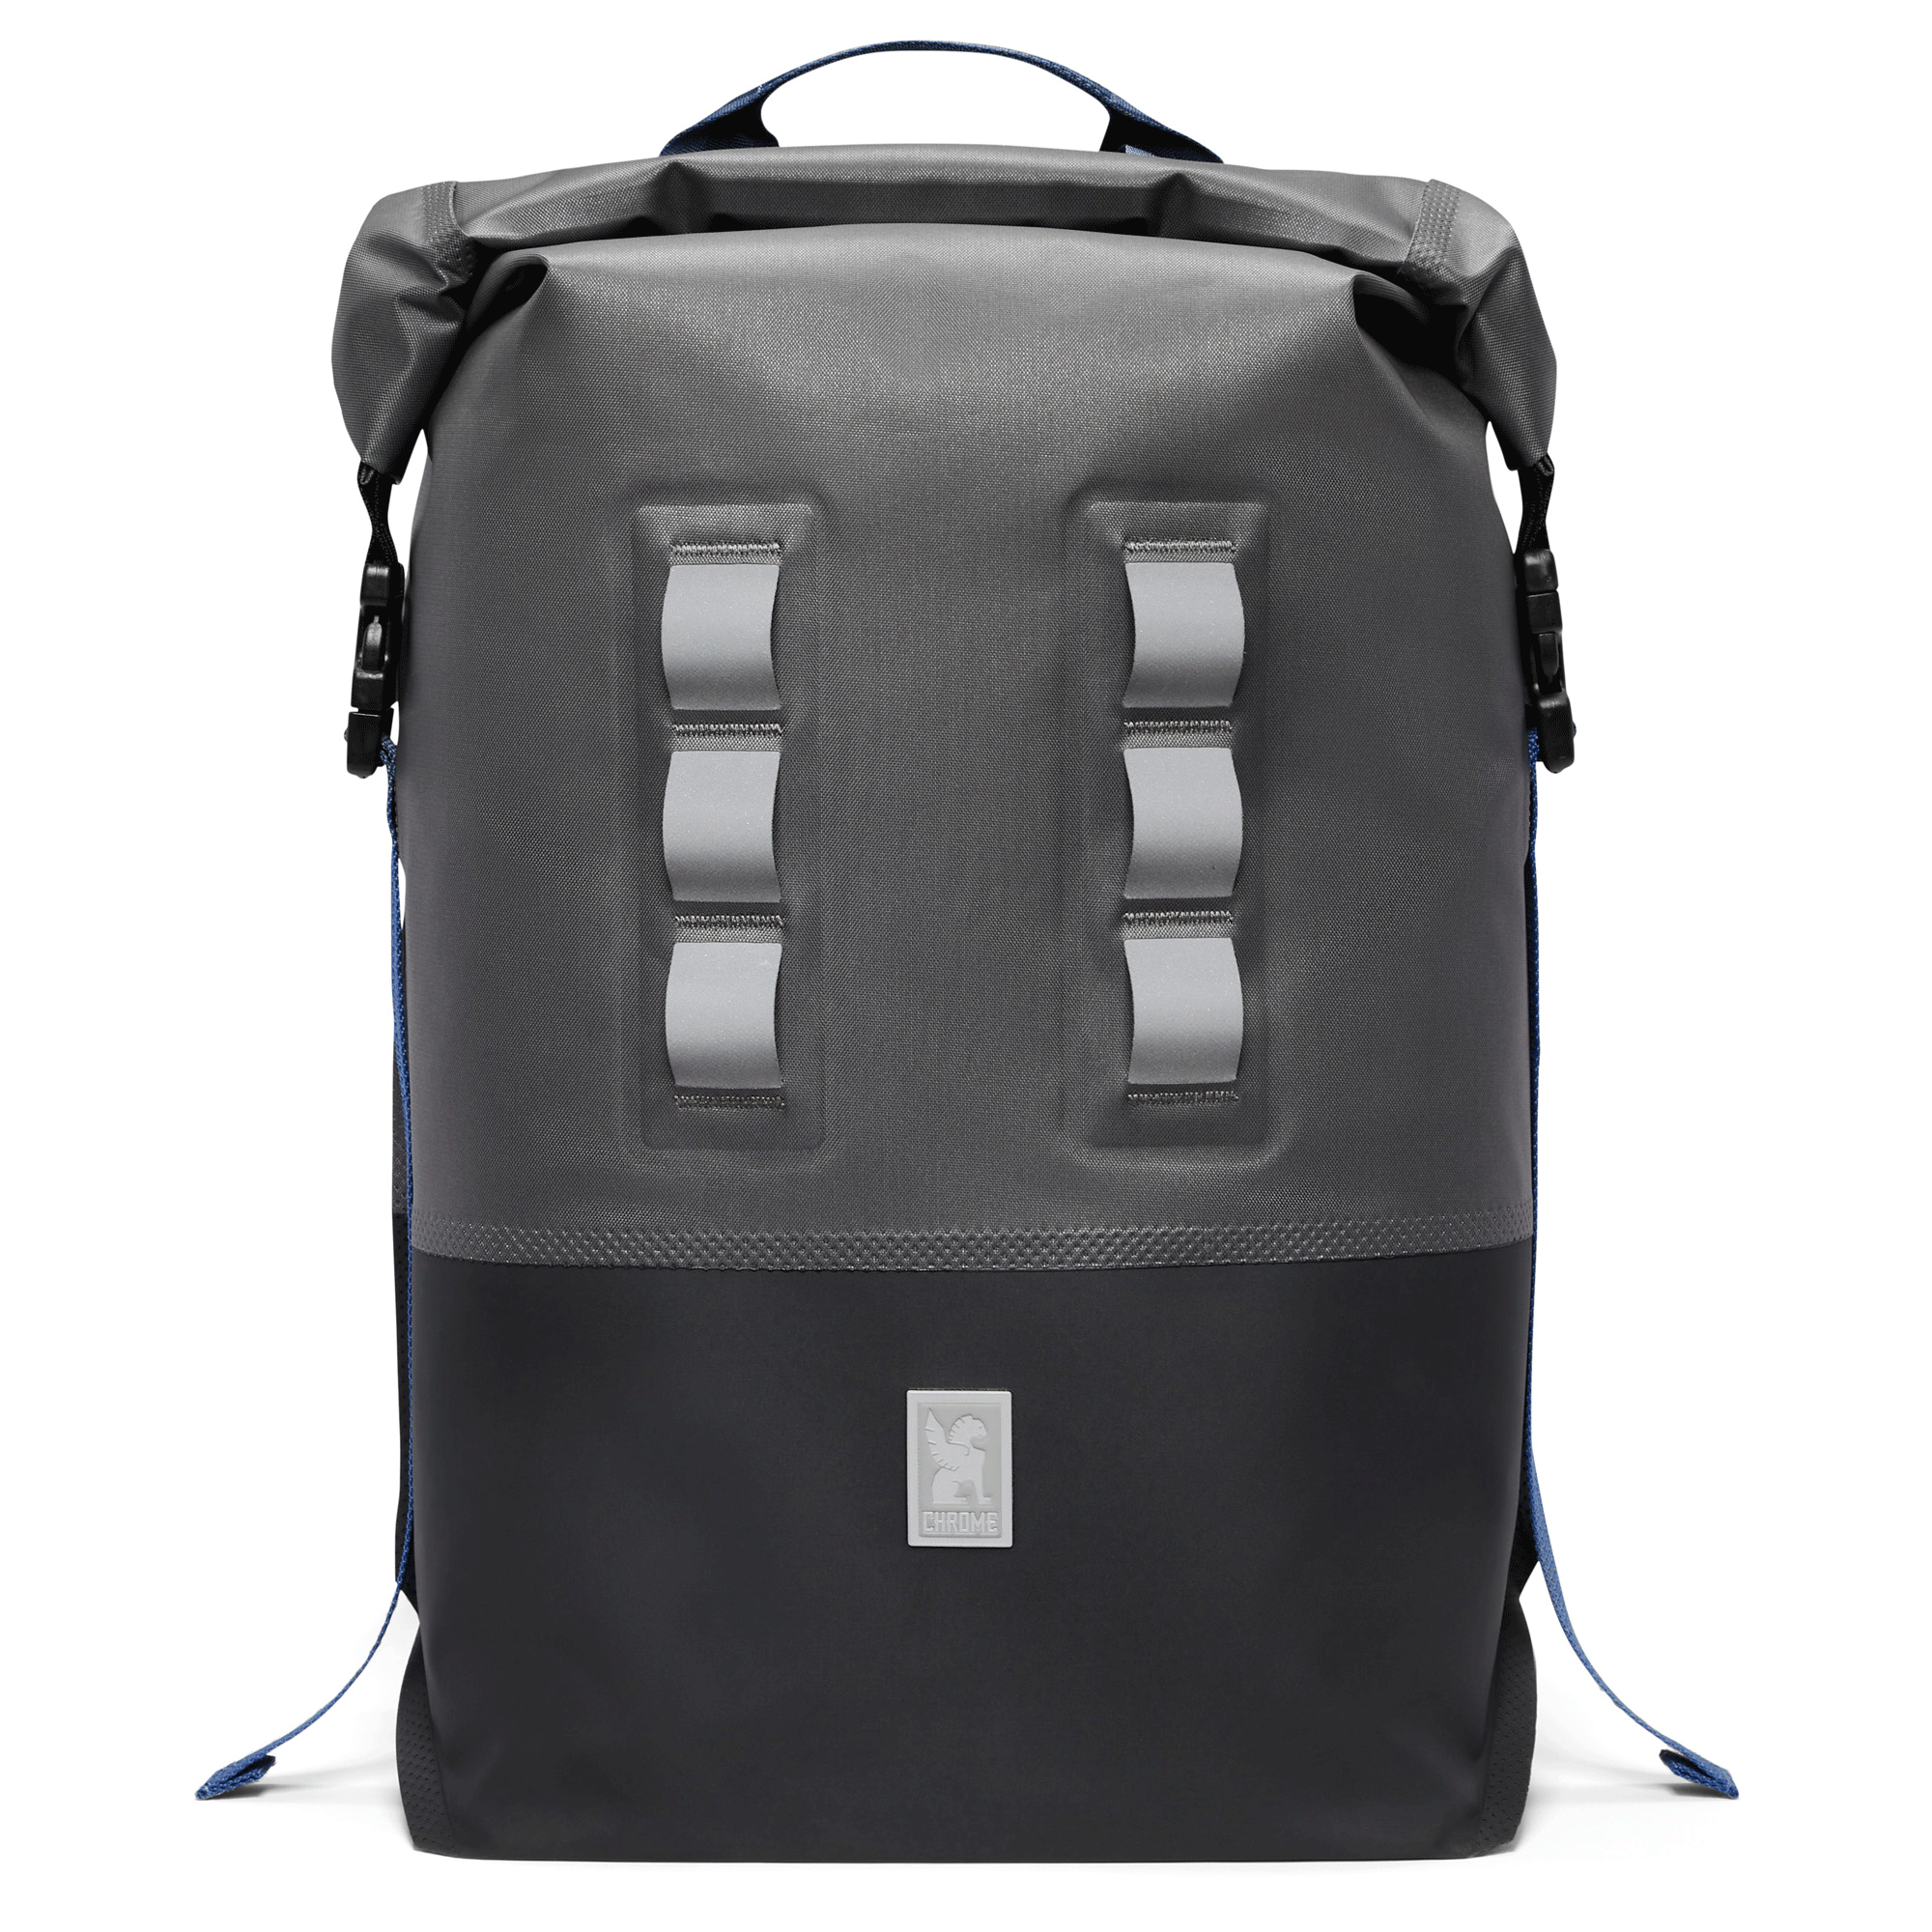 Waterproof 30L highly reflective backpack in grey showing reflecting loops#color_fog